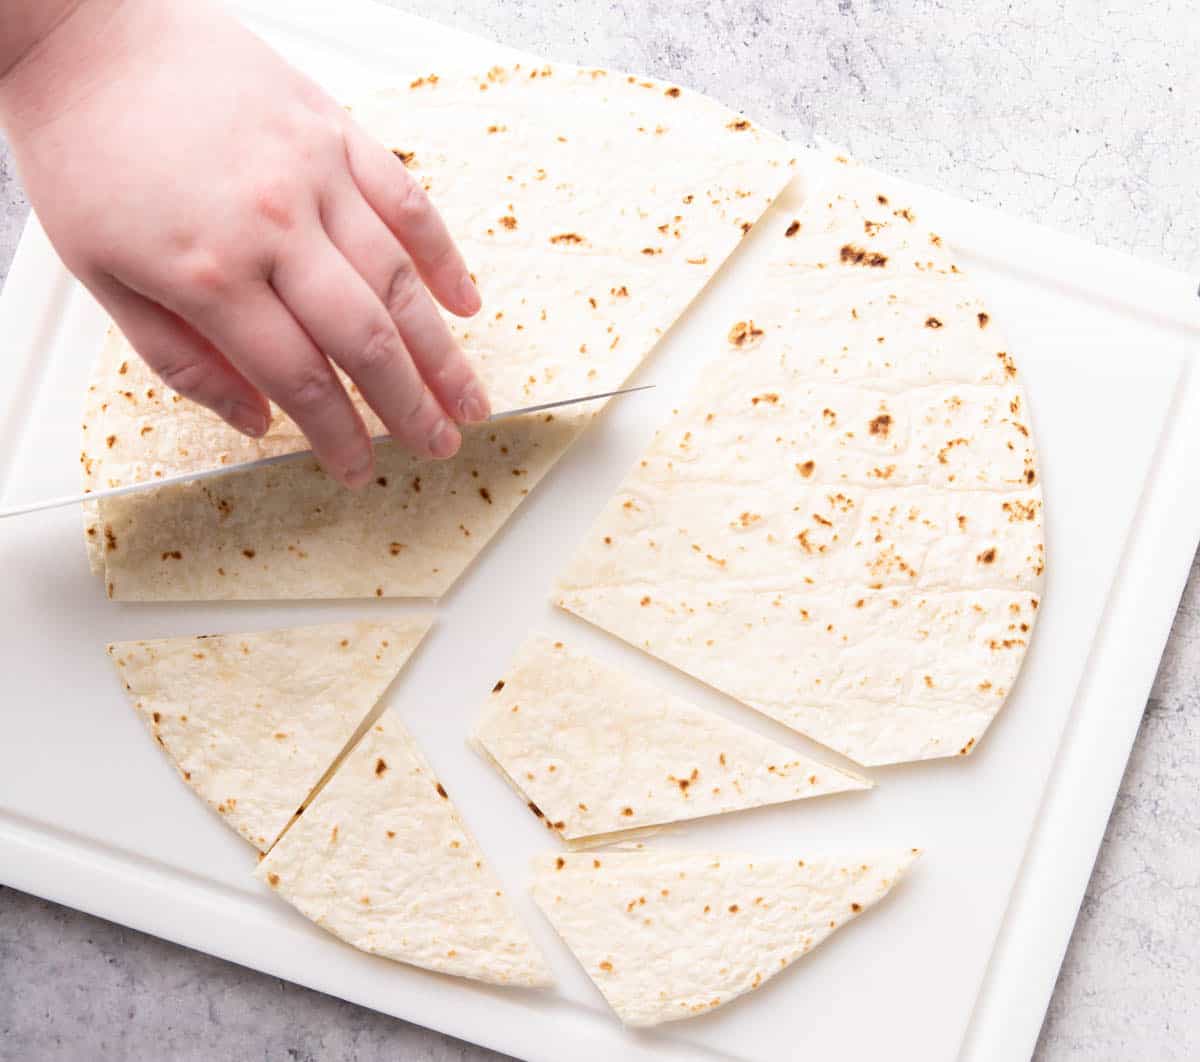 Photo showing How to Make Baked Tortilla Chips – slicing tortillas into chips